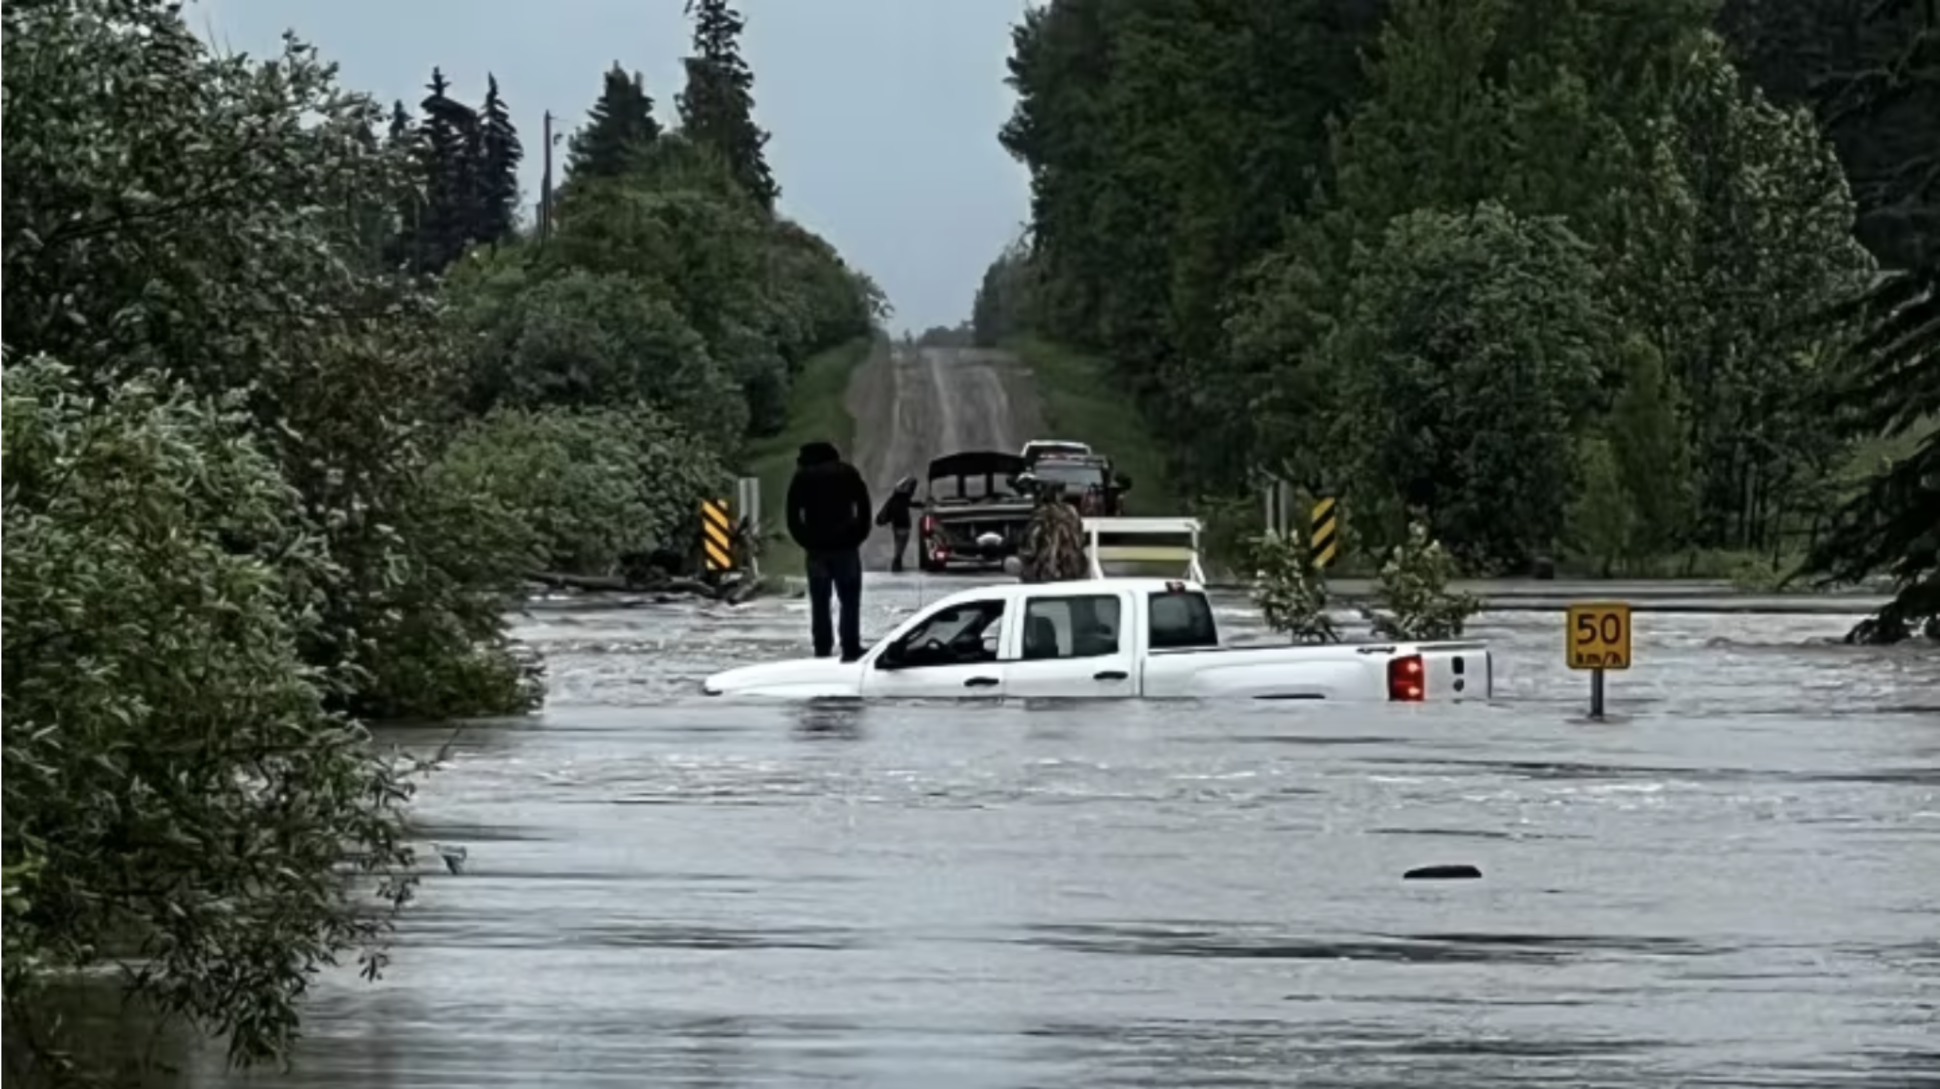 Fire to flood: County west of Edmonton faces new emergency following heavy rains